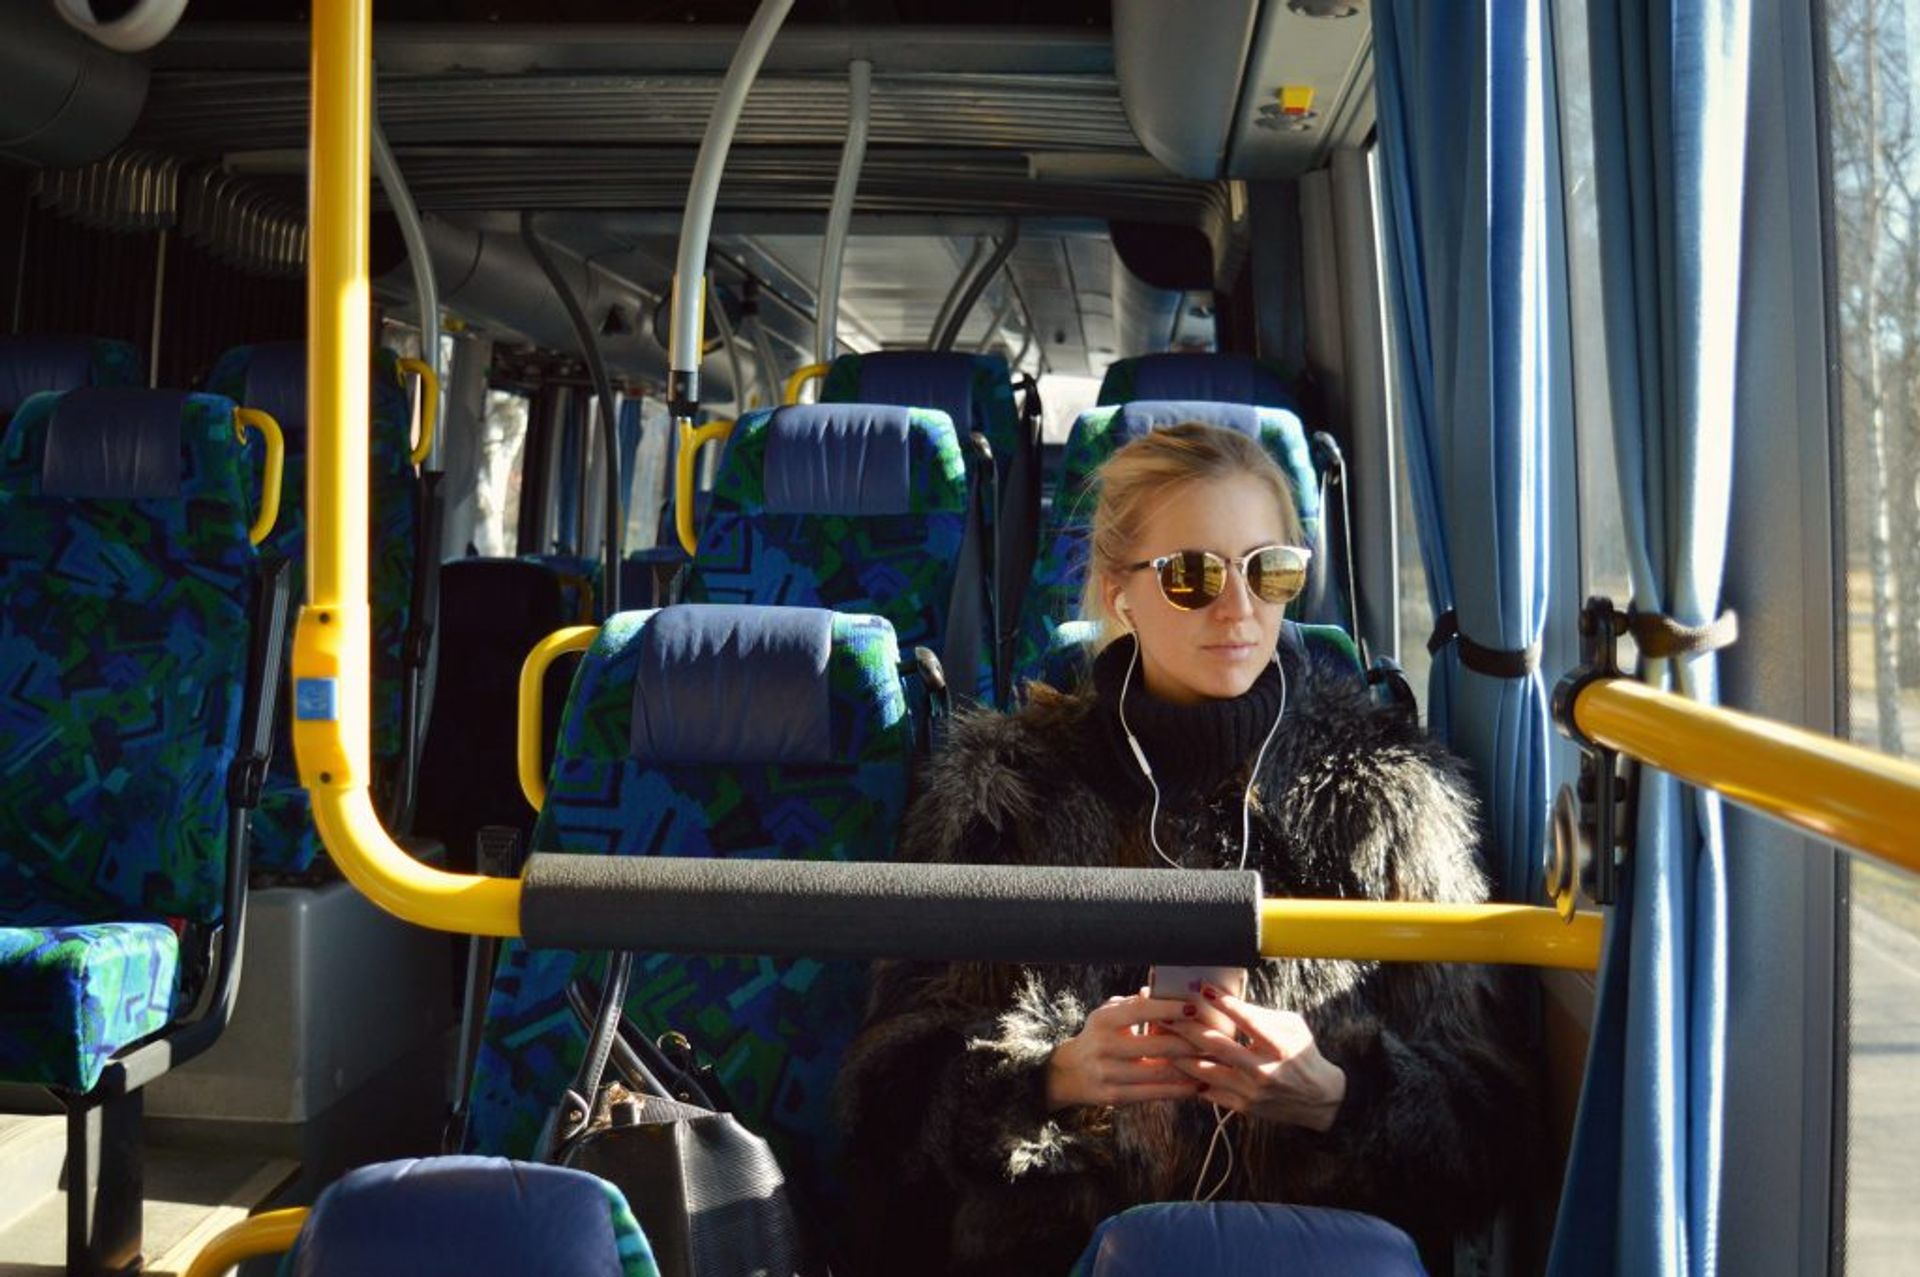 A passenger listening to music on the bus